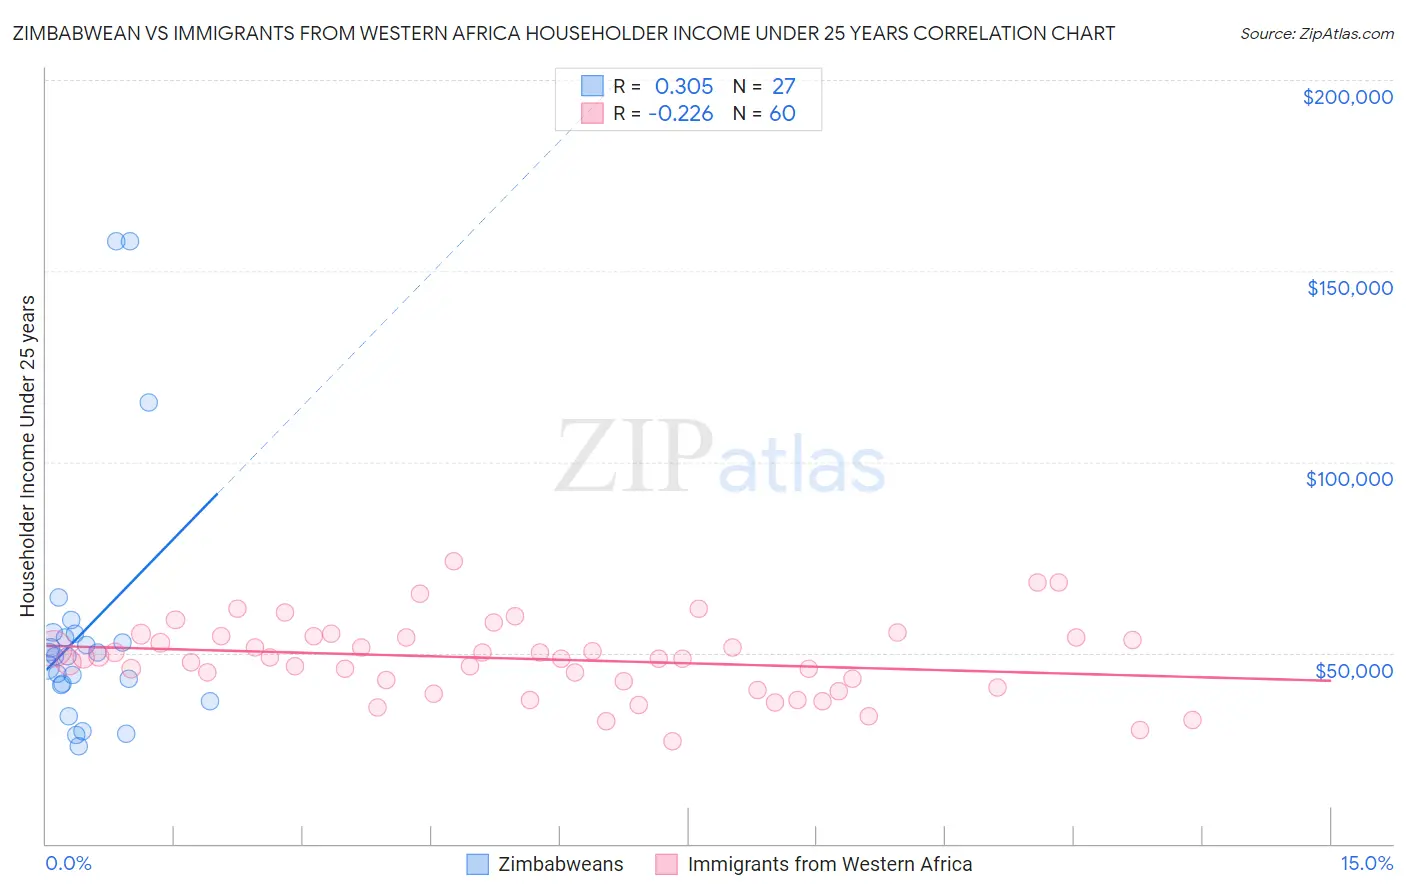 Zimbabwean vs Immigrants from Western Africa Householder Income Under 25 years